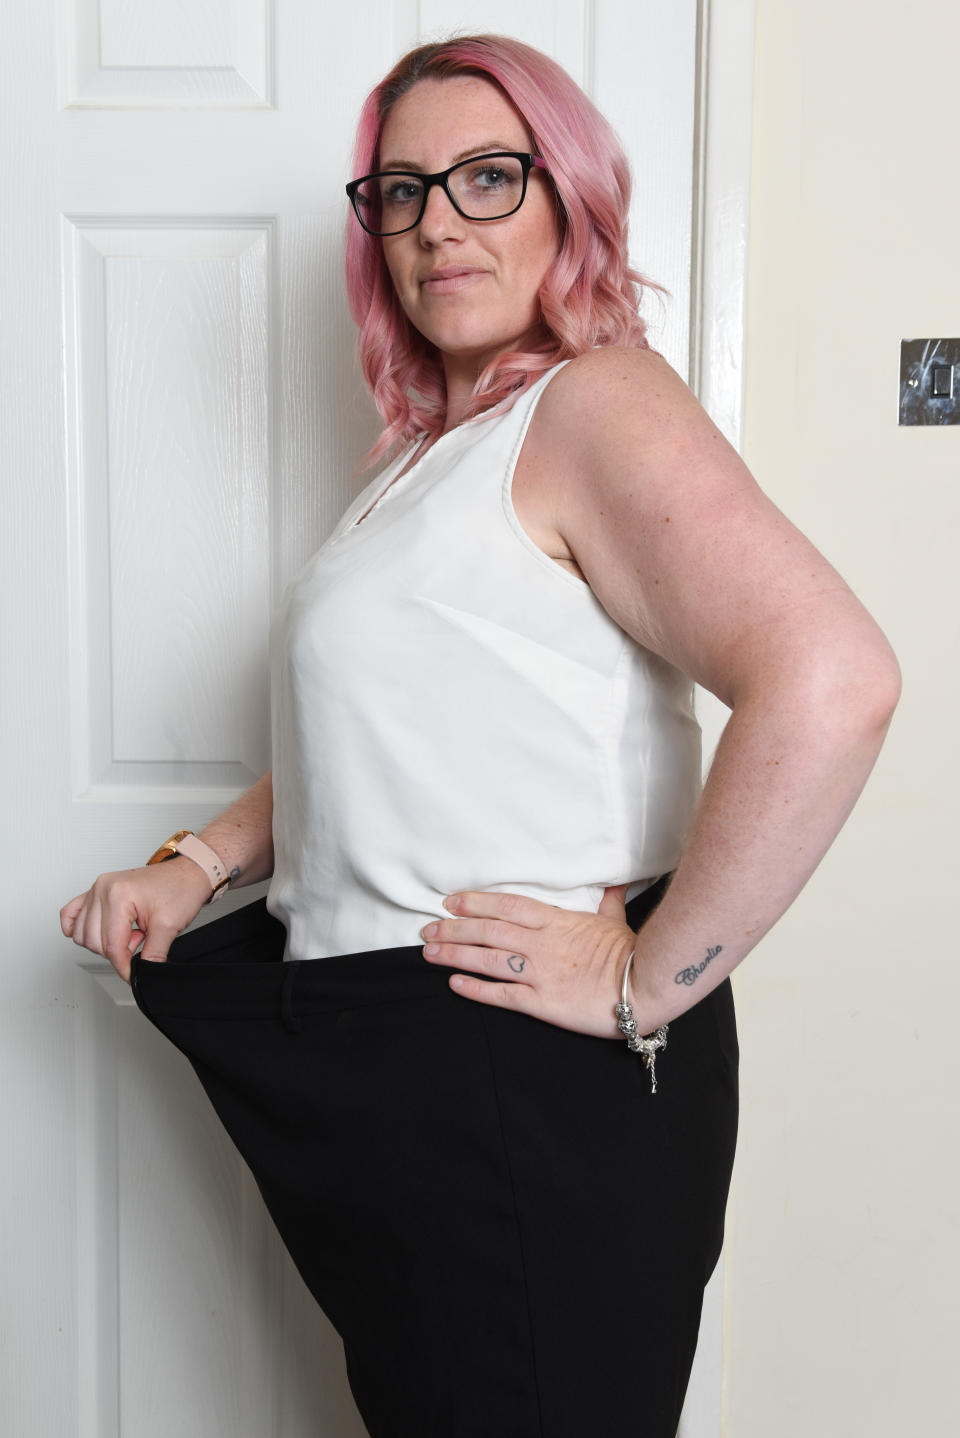  Ashleigh with an old pair of trousers) An obese bridesmaid has dropped six stone after a 'horrific' photo appeared online which made her look nine month pregnant. Ashleigh Bell, 32, says the photo changed her life and she suddenly realised that her size 24 waistline couldn't balloon any further. The mum-of-three spotted the photo on Facebook last July six months after her sisterâs wedding in 2018. Ashleigh says she felt 'mortified' by the awful image - which she says made her look pregnant - and actually apologised to her sister for being obese on her special day. SEE CATERS COPY